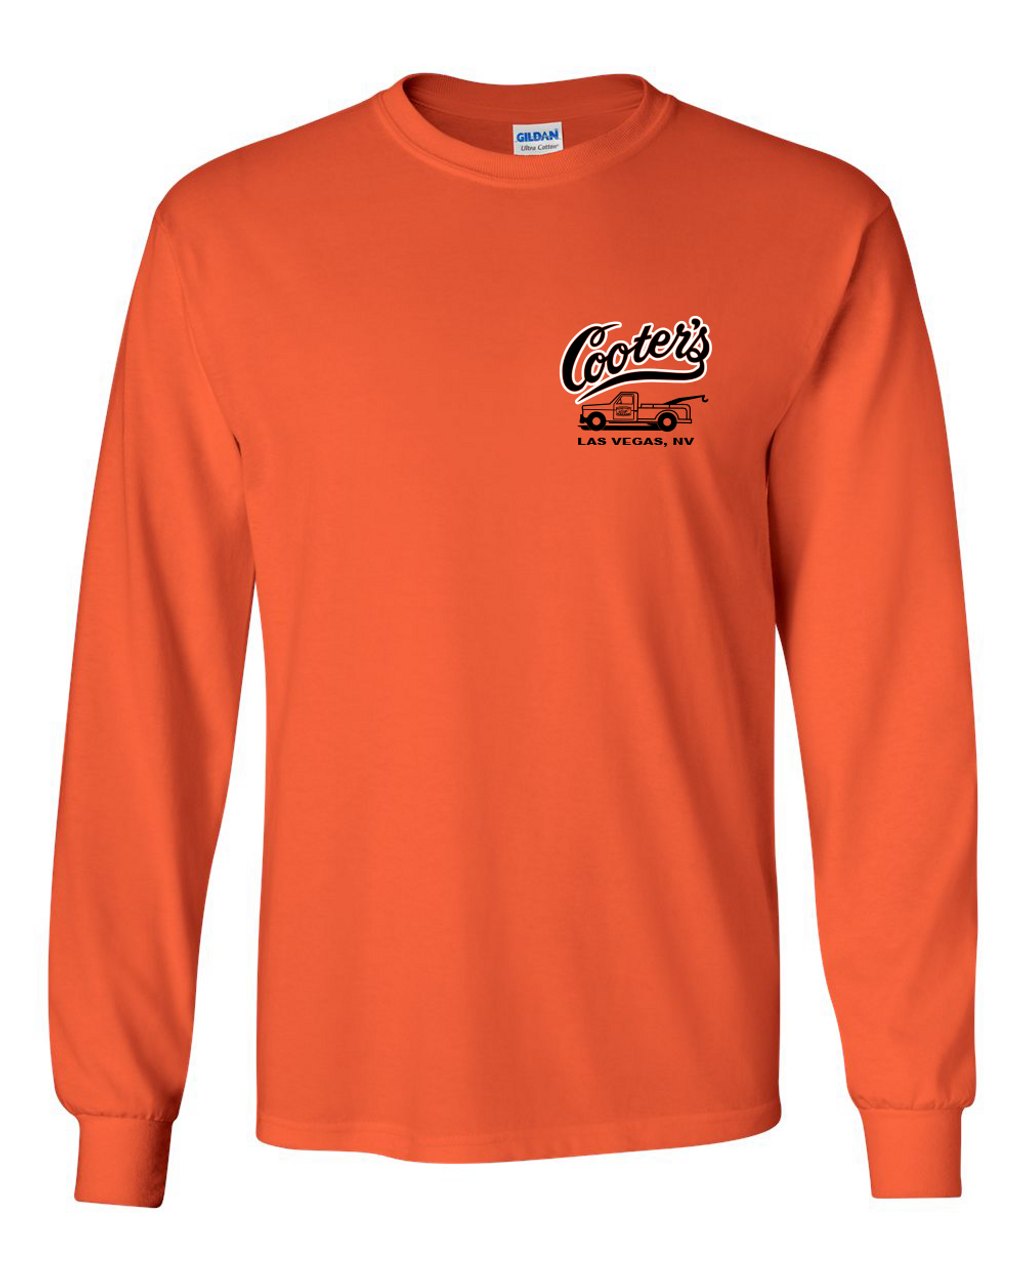 Cooter's Original 01 Youth Long Sleeve Tee